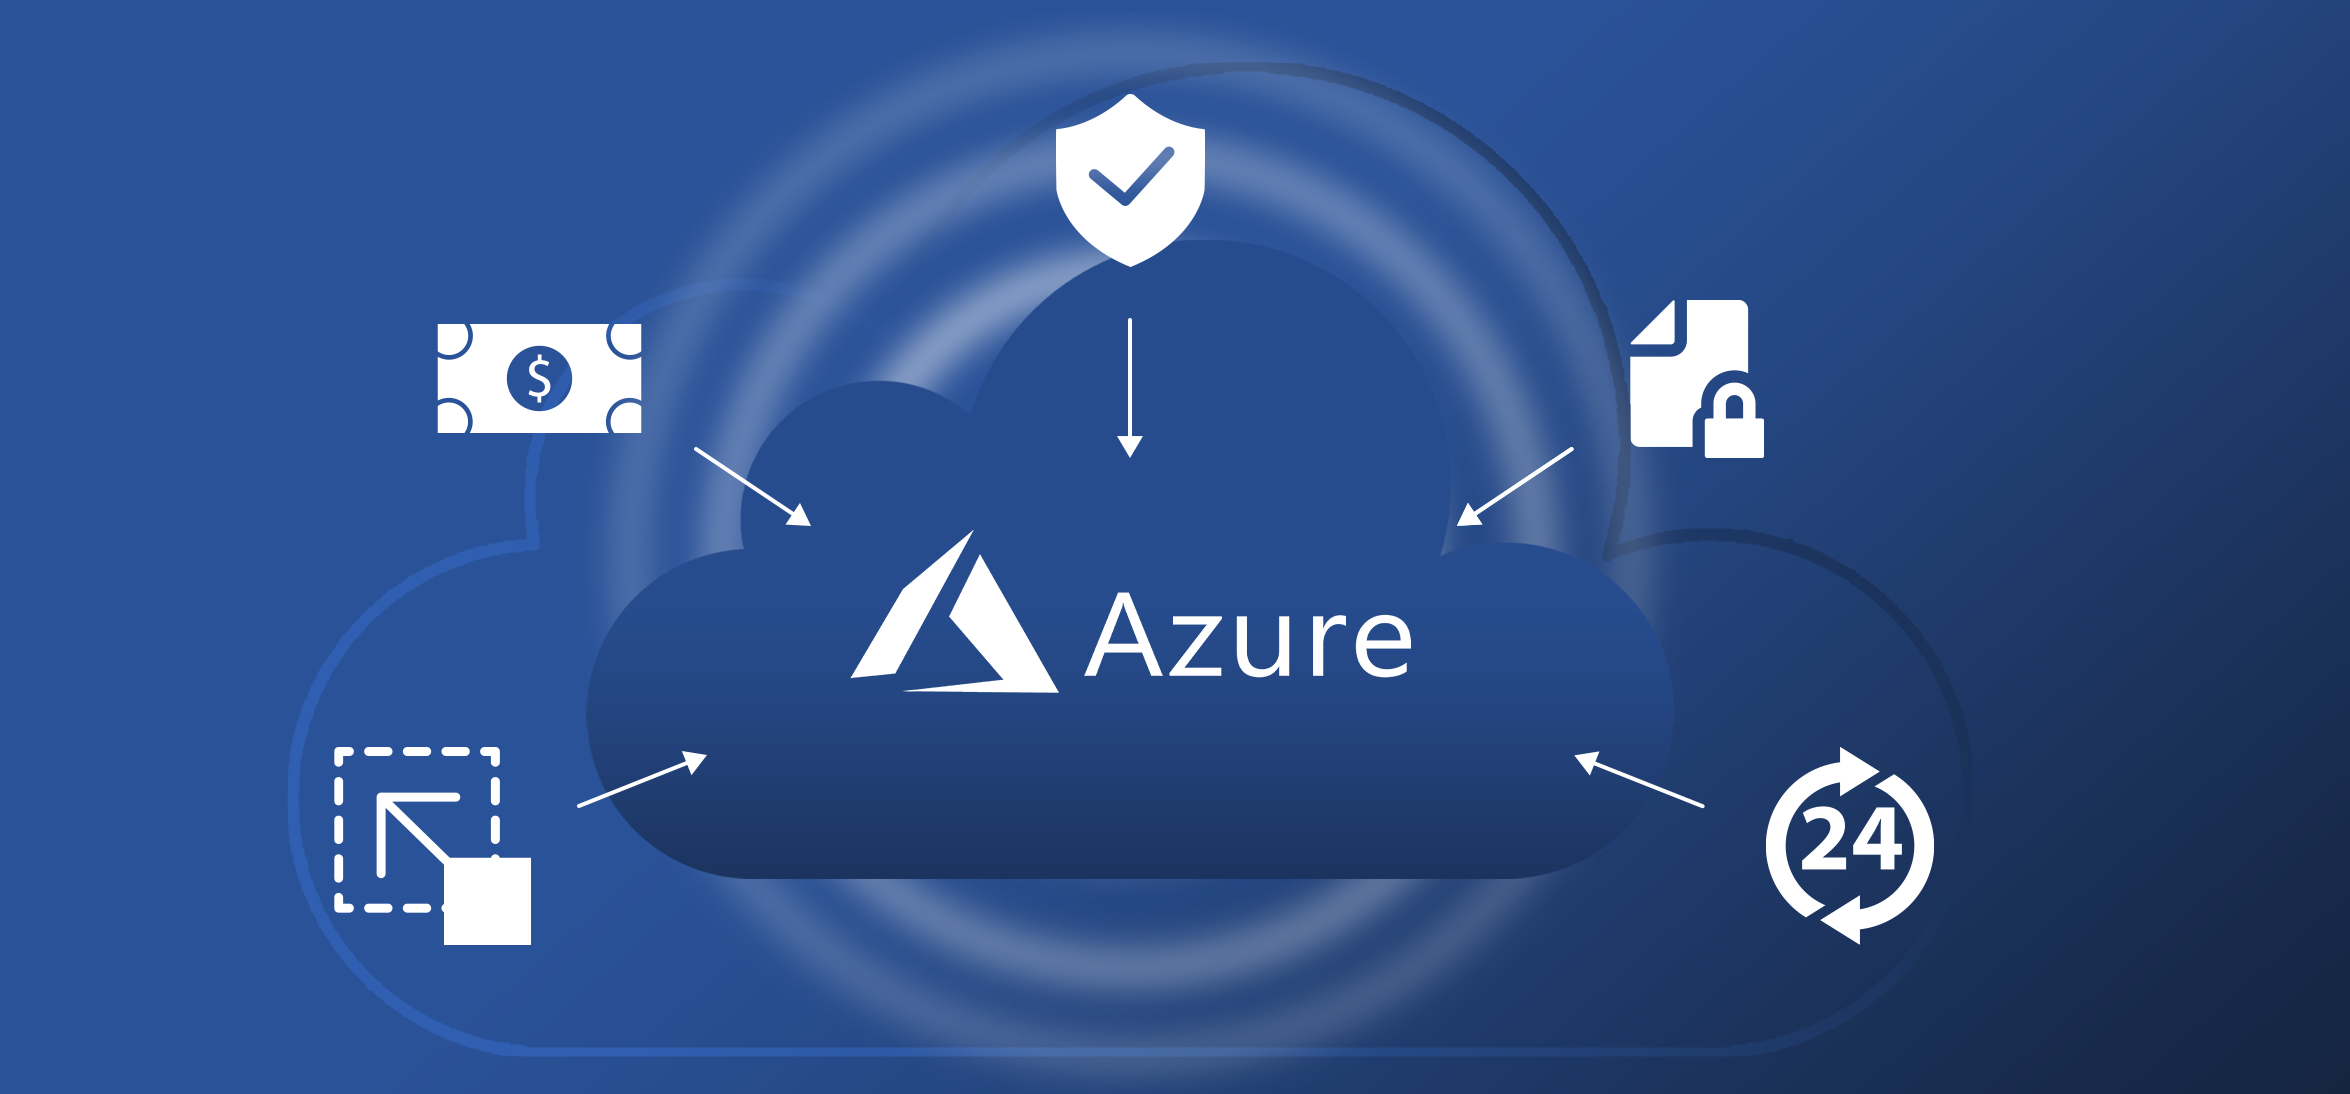 Microsoft Azure Administration and Consulting Services in Del Mar CA, 92014